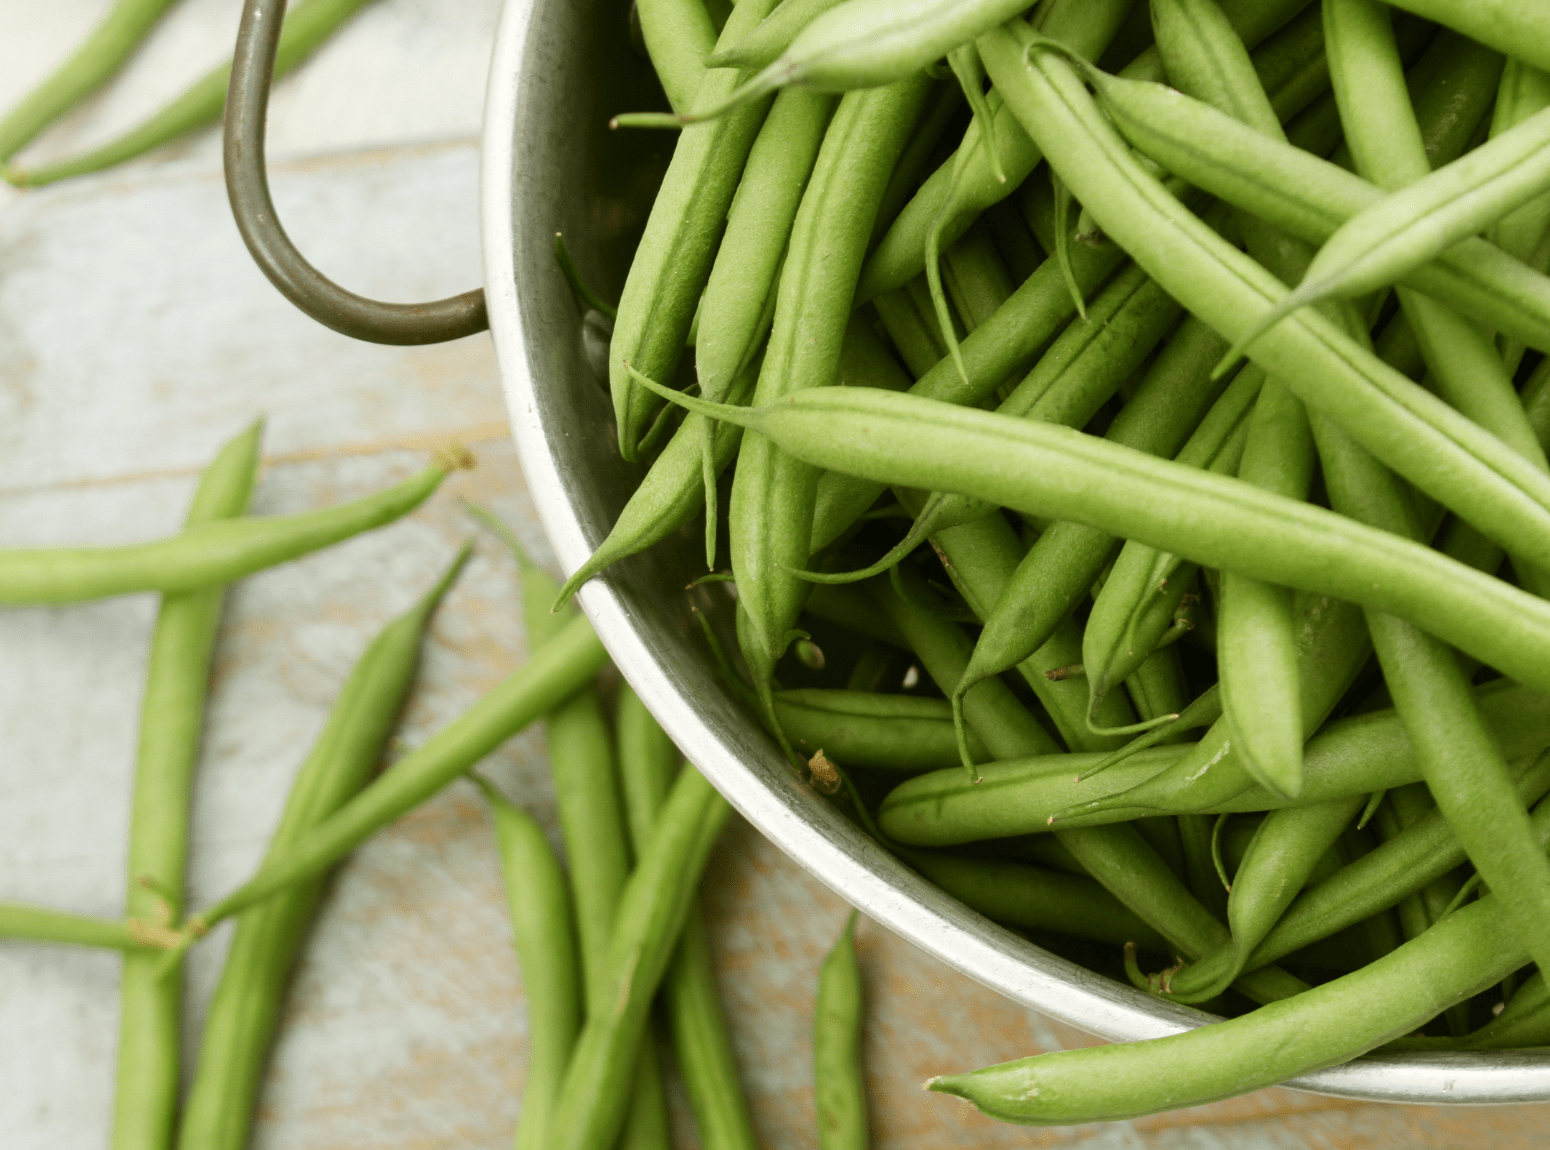 INSIDEOUT - Easy green salad article haricots verts